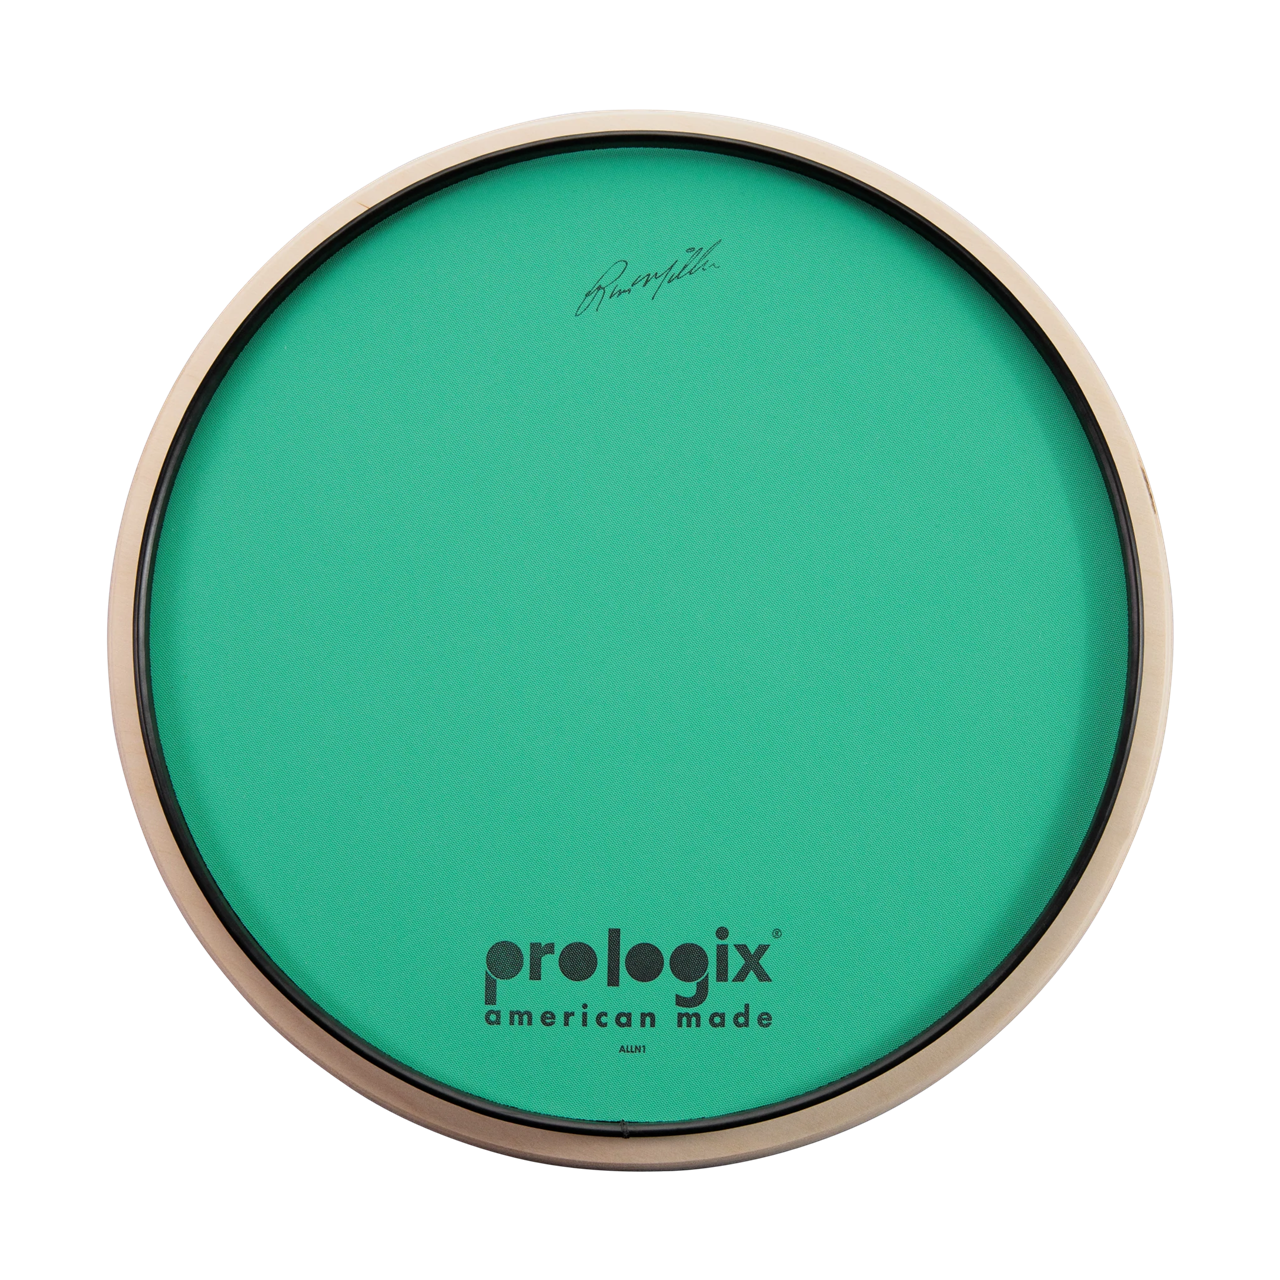 Prologix All In One Pad by Russ Miller